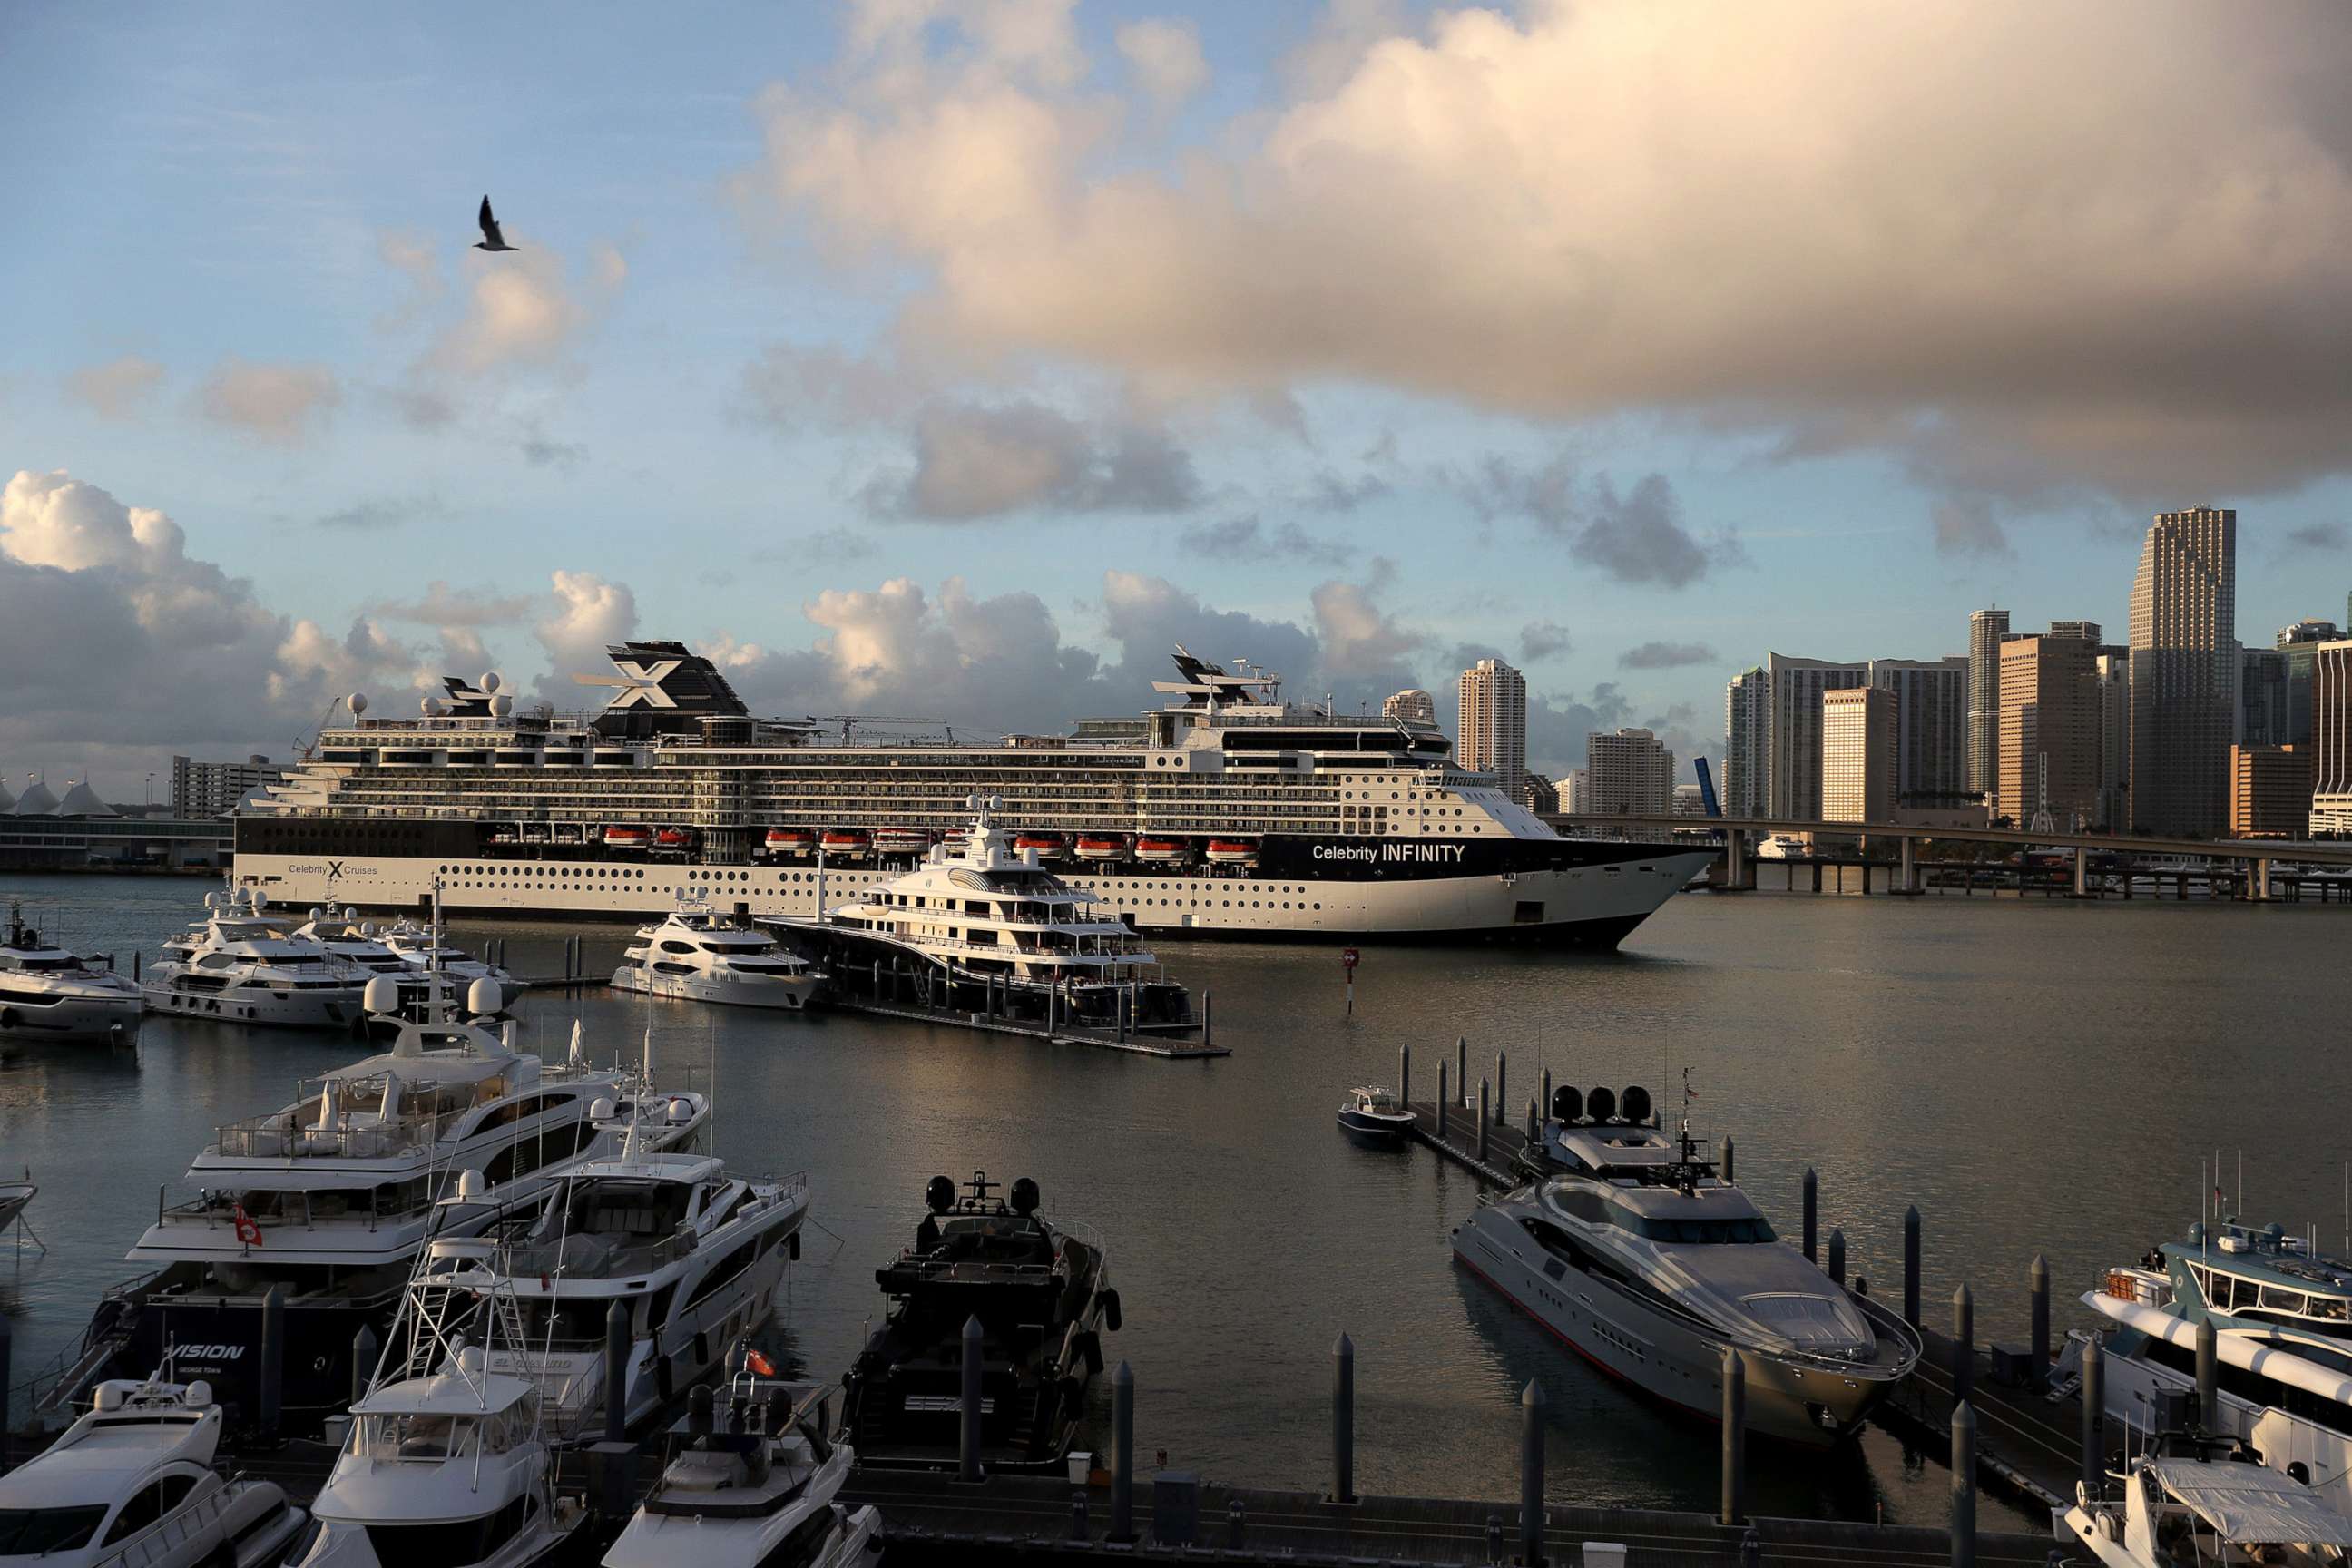 PHOTO: In this drone image, the Celebrity Infinity Cruise ship returns to PortMiami from a cruise in the Caribbean as the world deals with the coronavirus outbreak on March 14, 2020, in Miami.